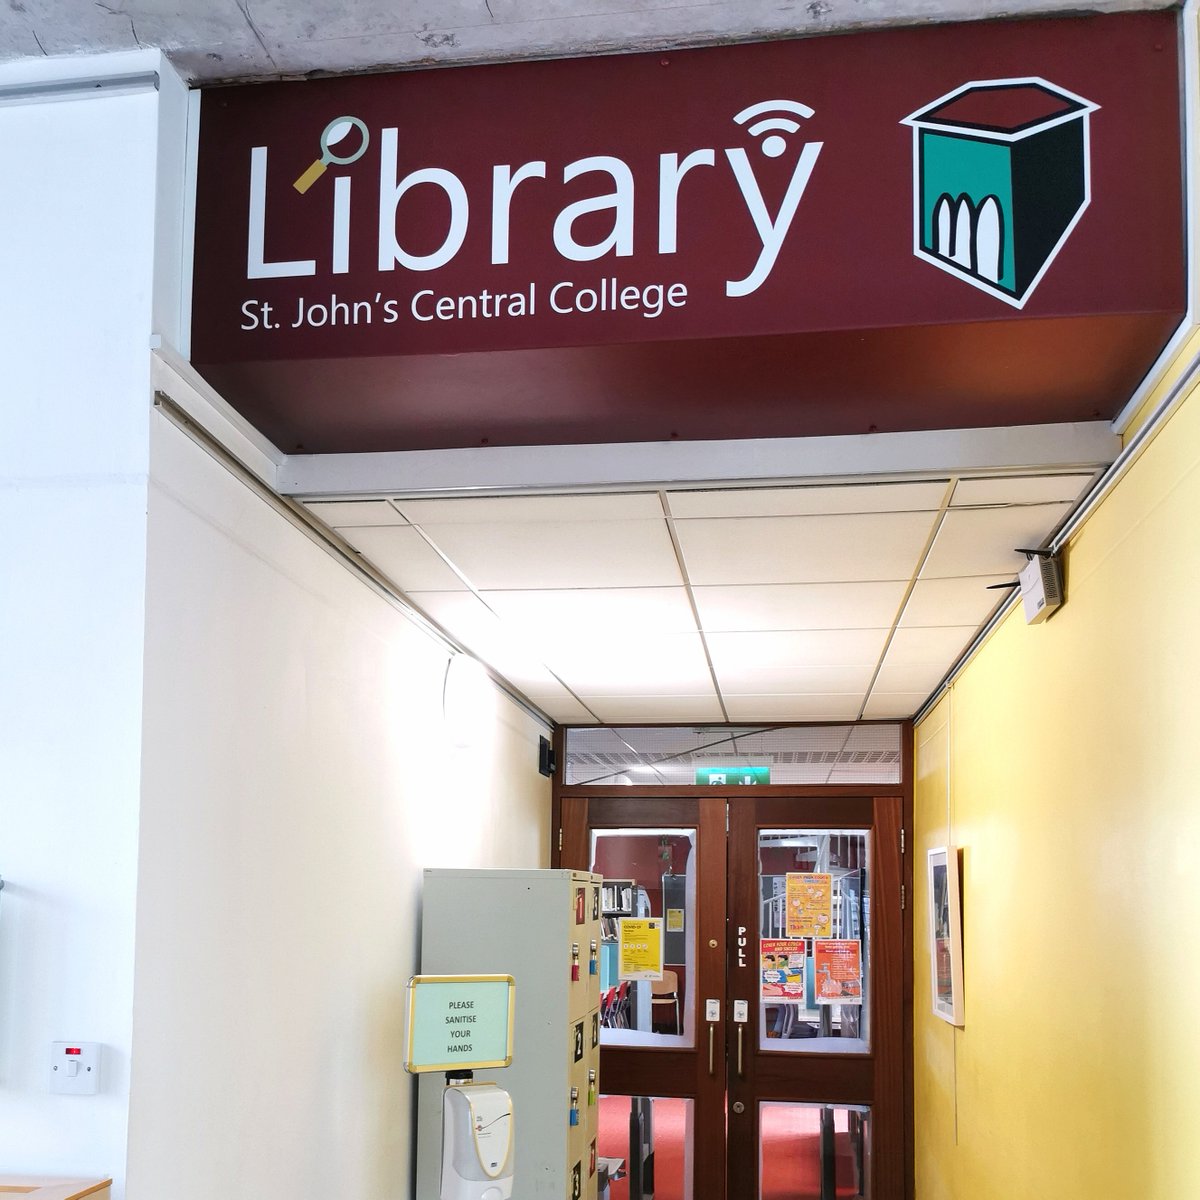 We are delighted with our new Library signage over the entrance. Installed today and looks well!